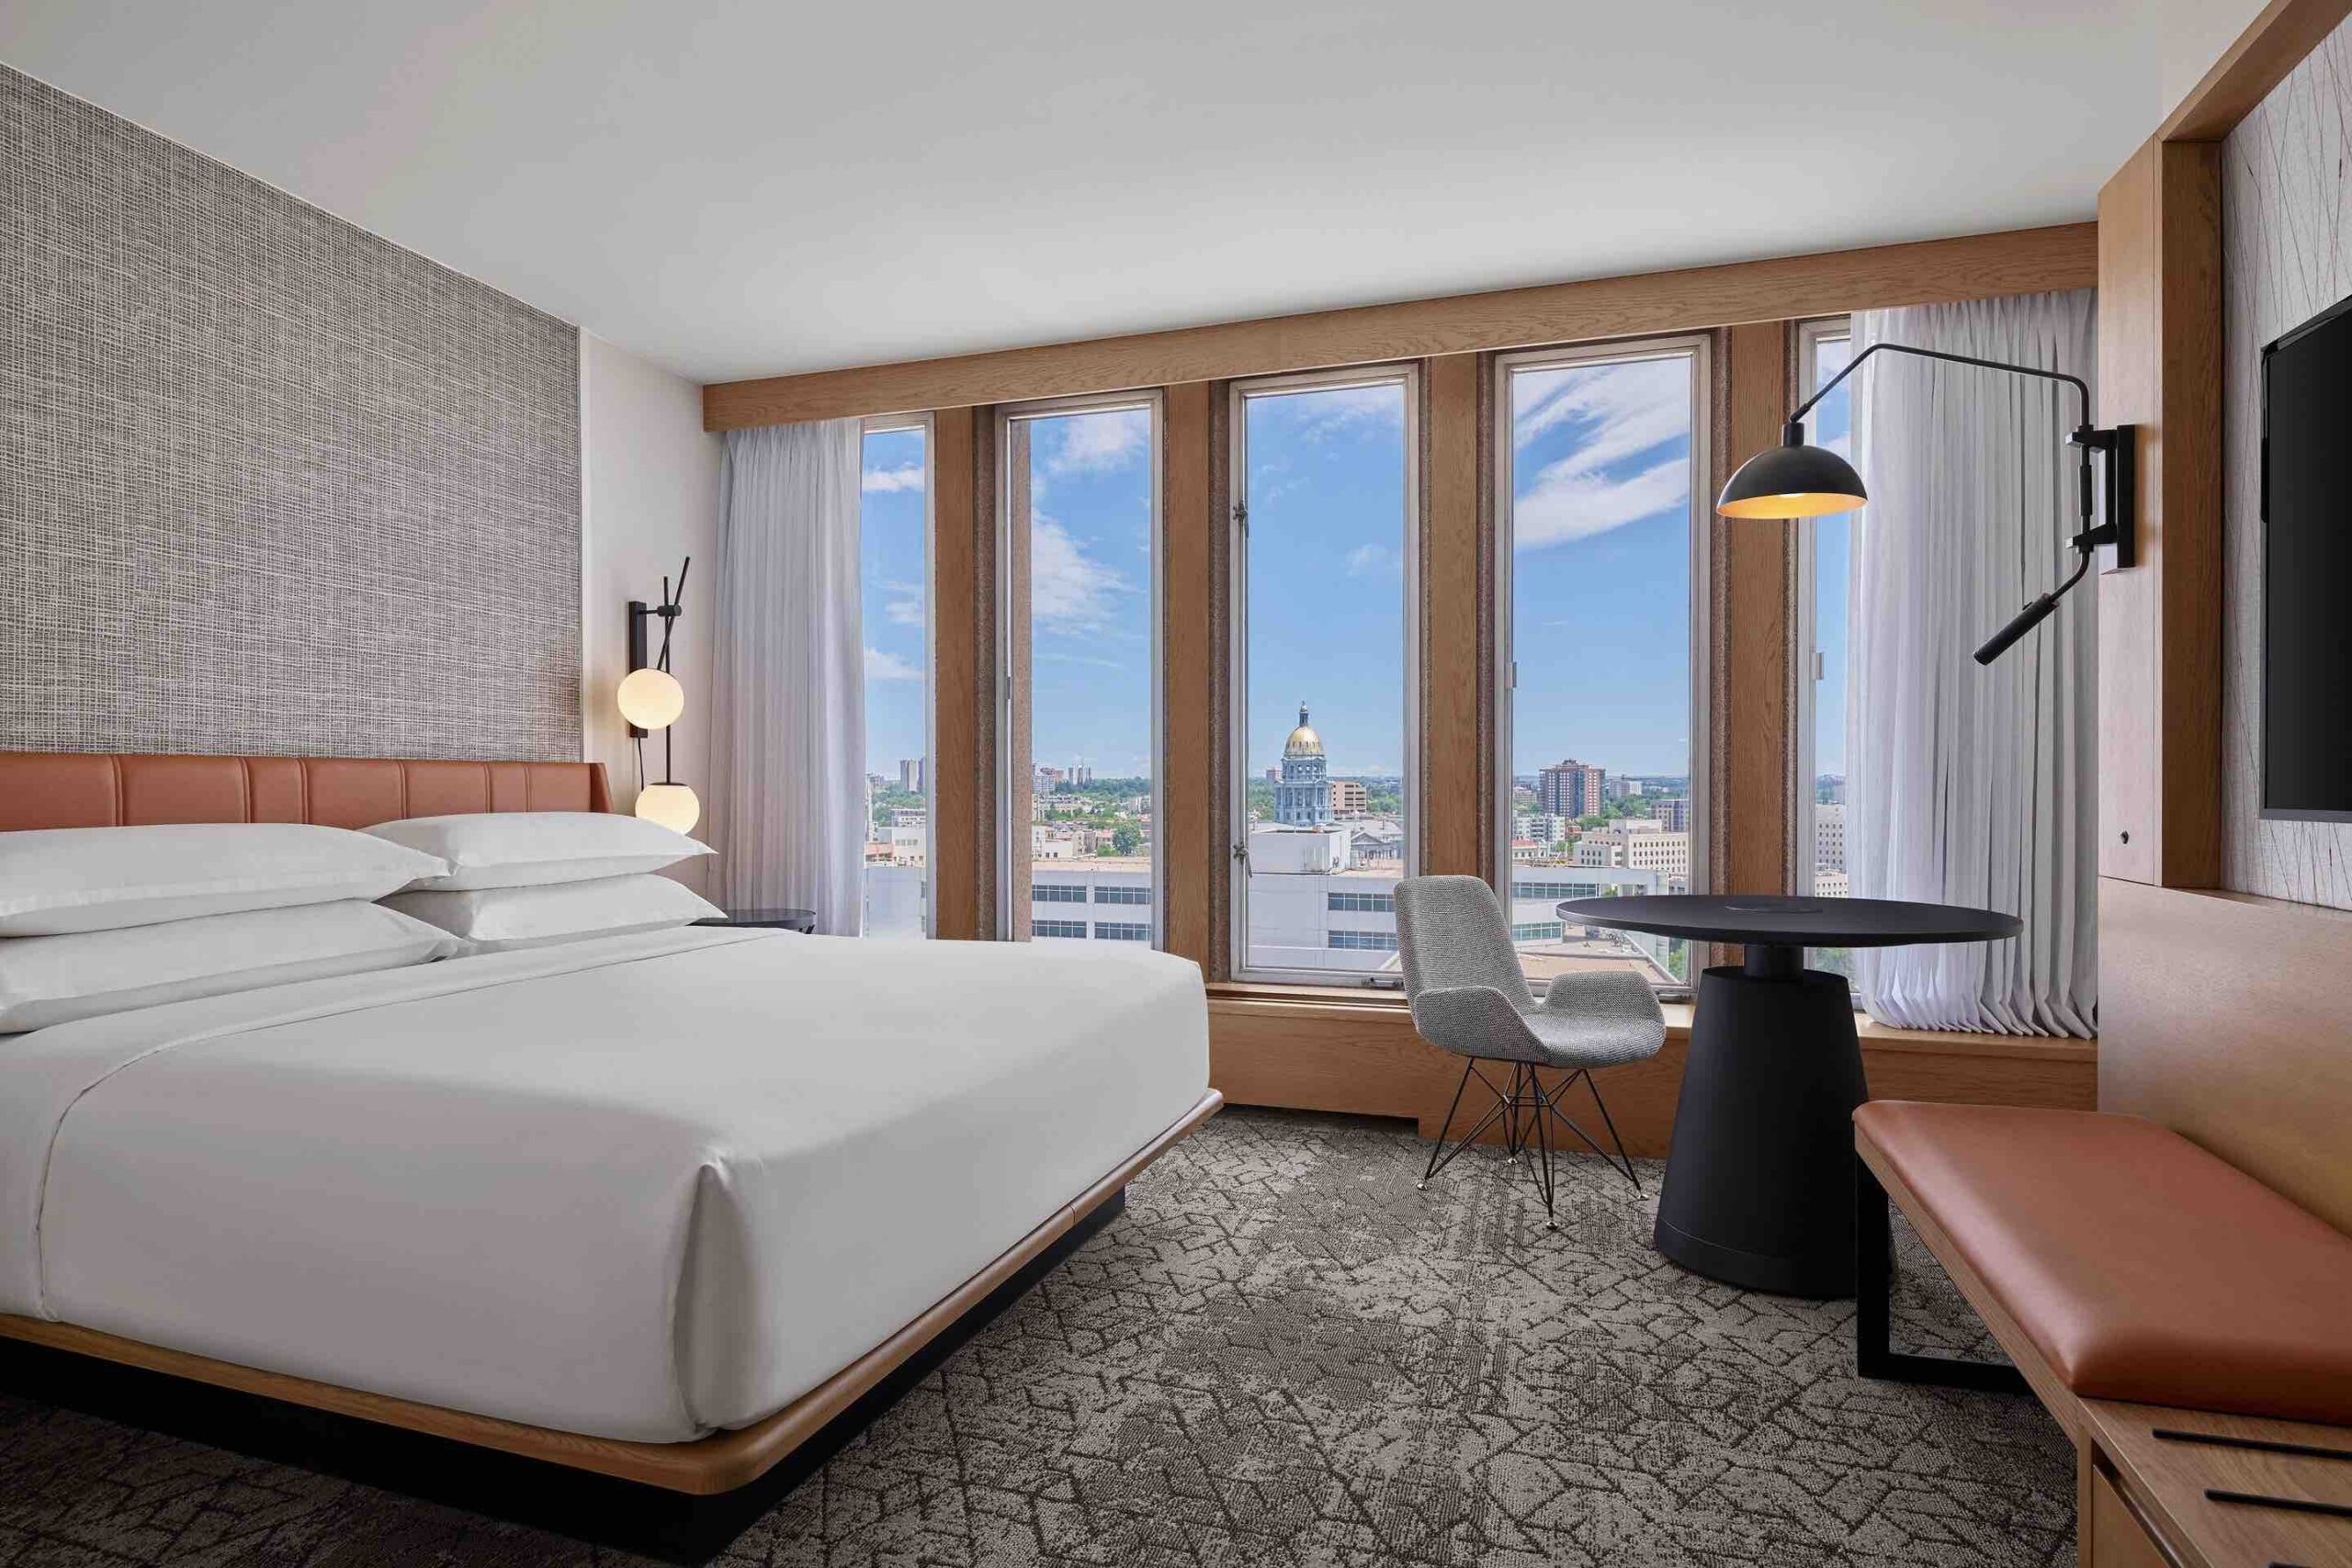 Sheraton Denver dends-king-guestroom-1797-hor-clsc view over state capital from one of the top luxury hotels in Denver